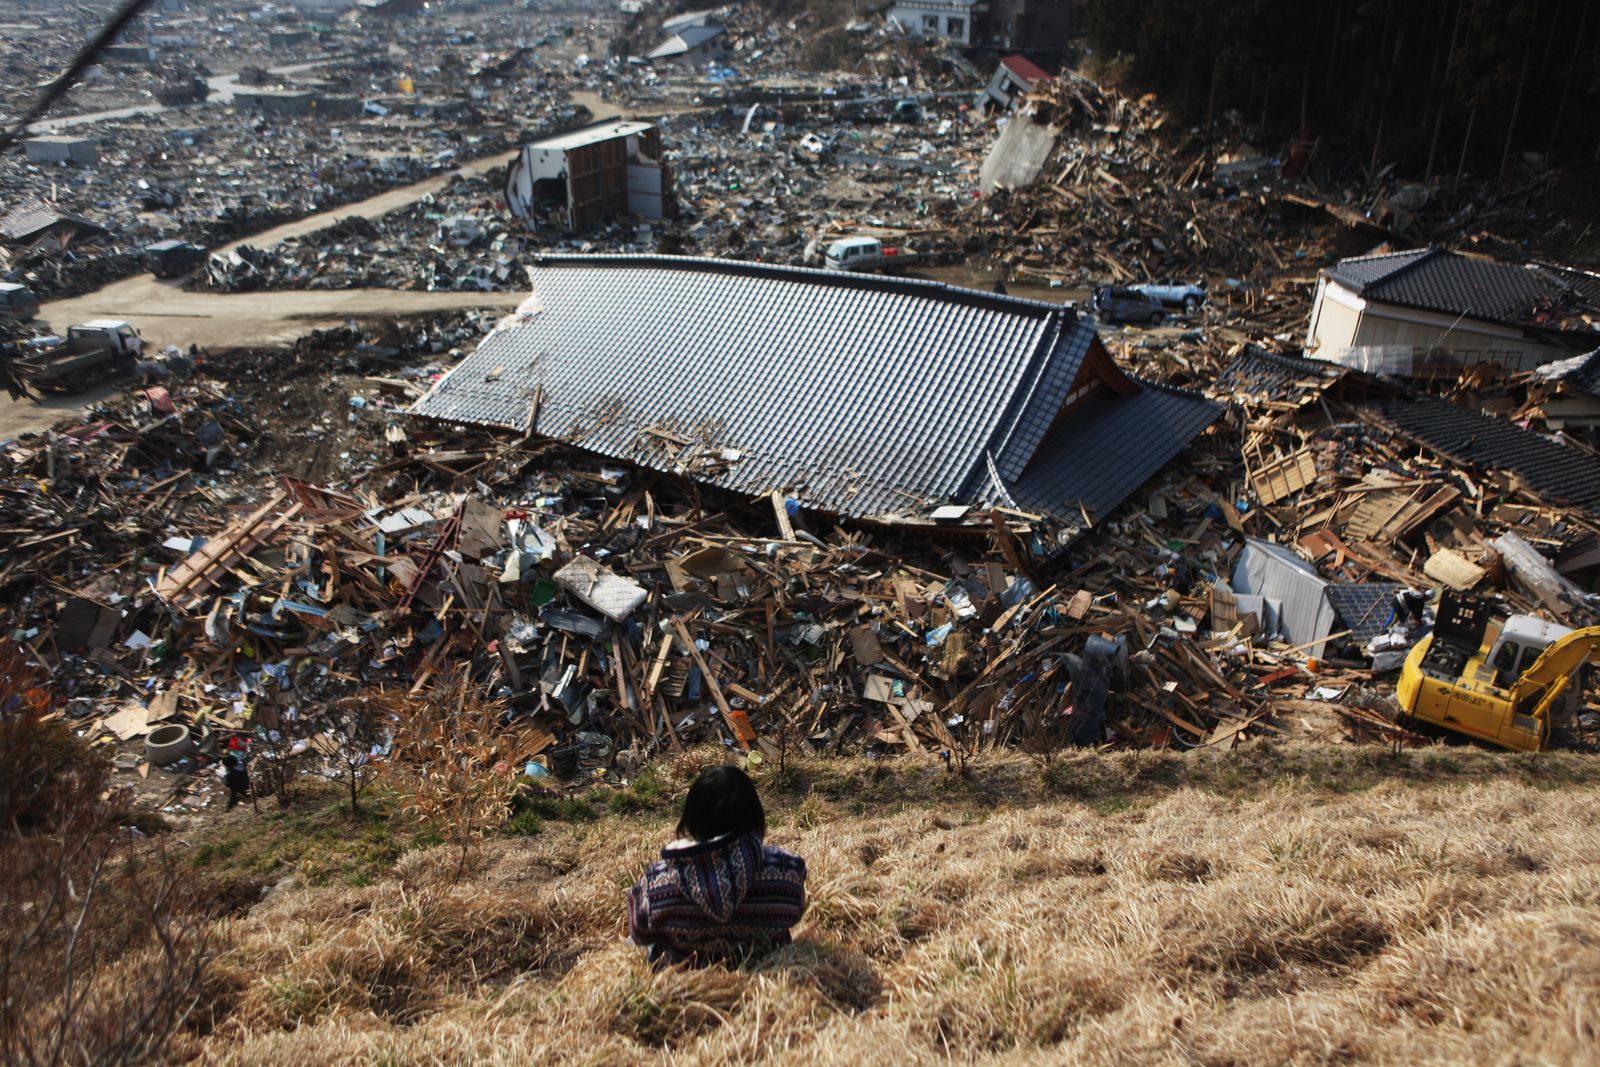 © Hiroko Masuike - Image from the After a Tsunami, a Young Monk Finds Her Calling photography project